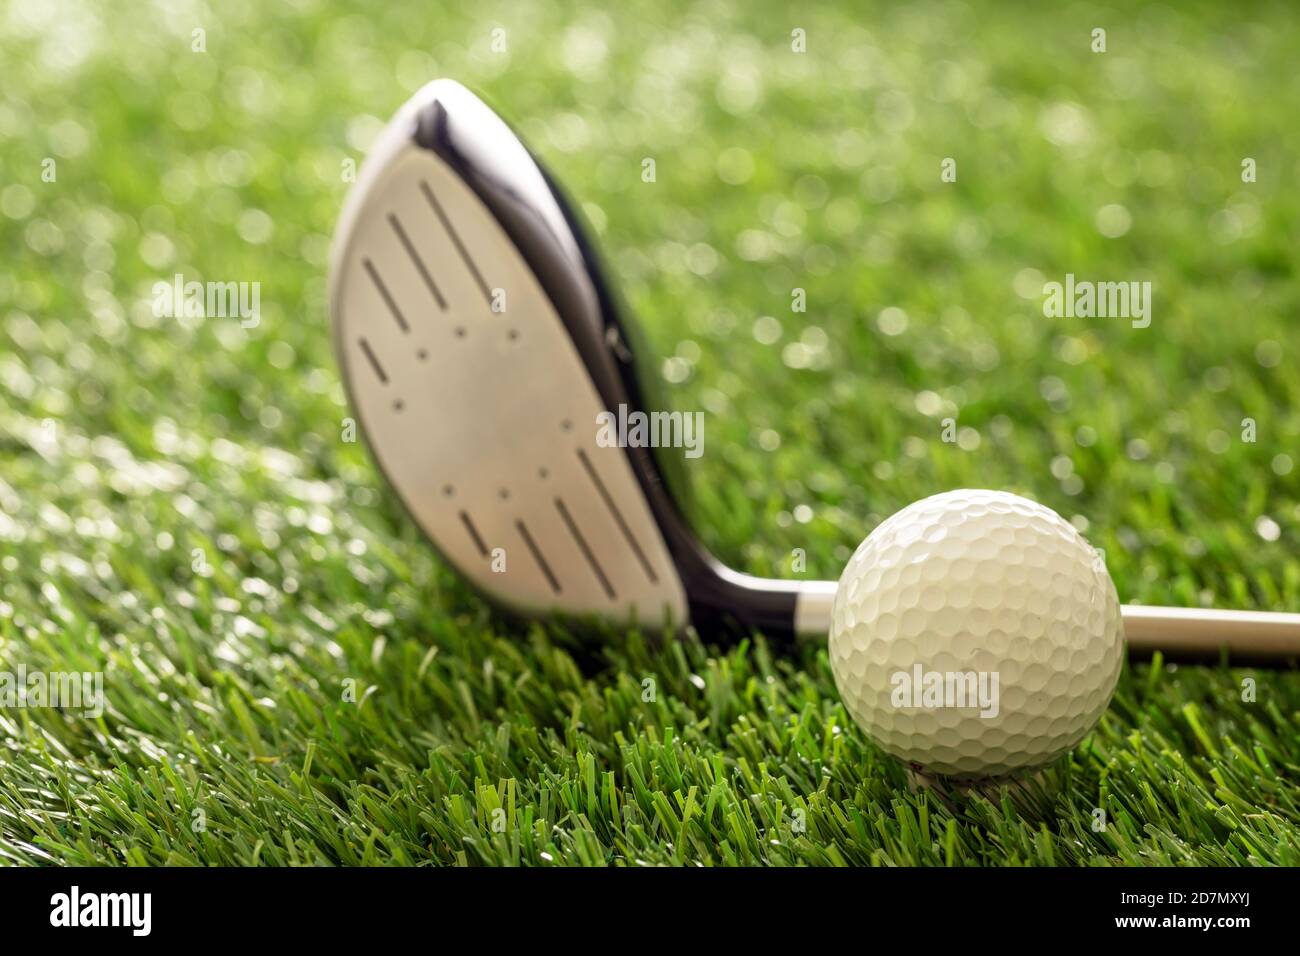 Golfing sport equipment and club concept. Golf ball and stick on green course lawn, sunlight reflections, close up view. Stock Photo